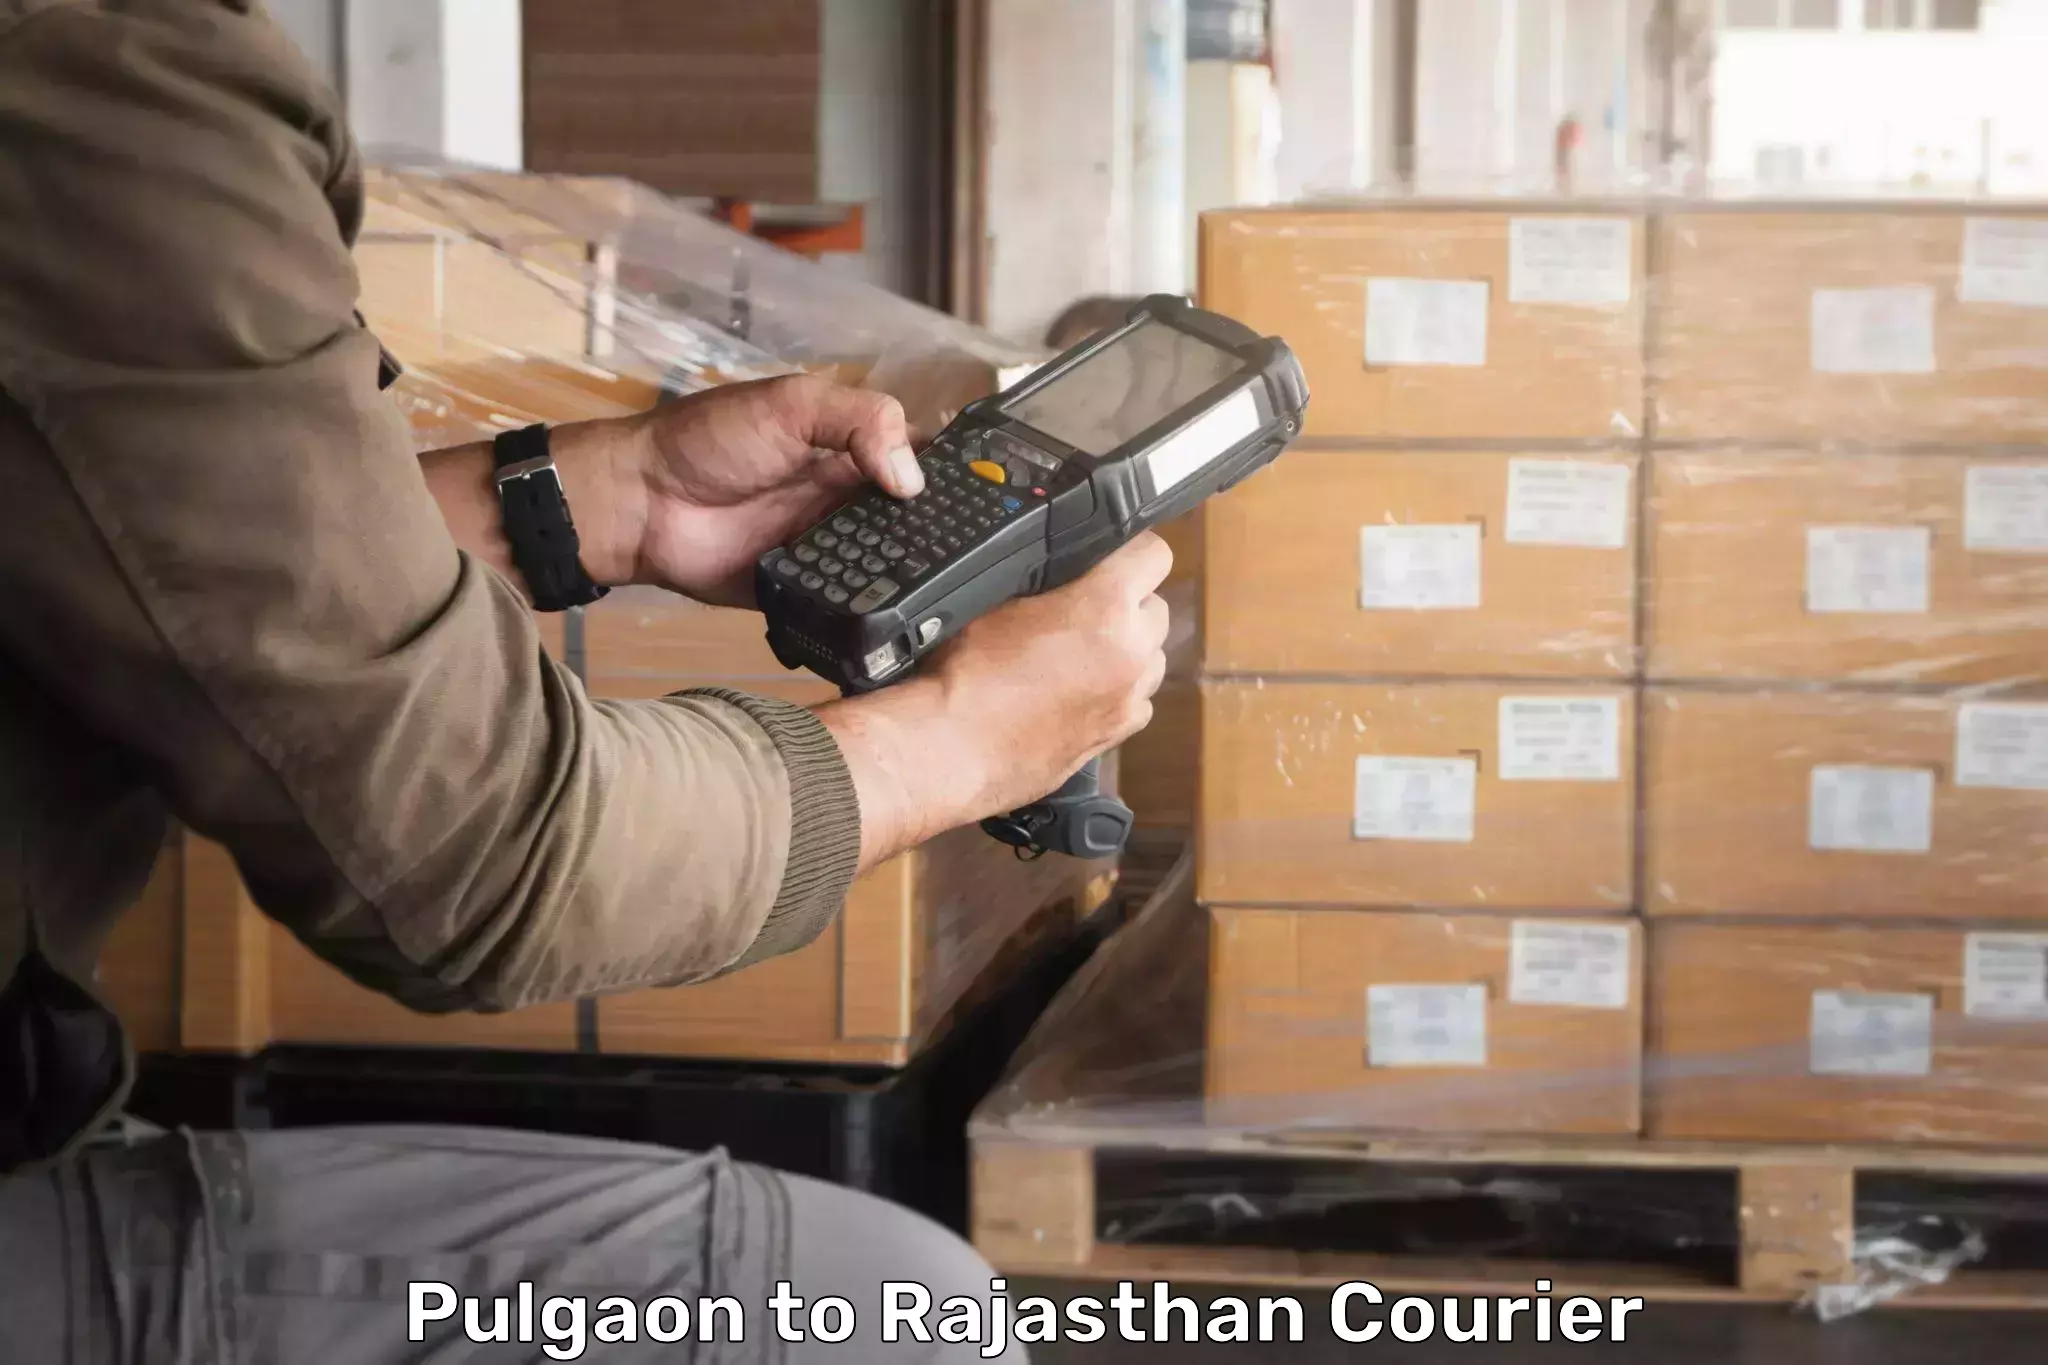 Courier service comparison Pulgaon to Rajasthan